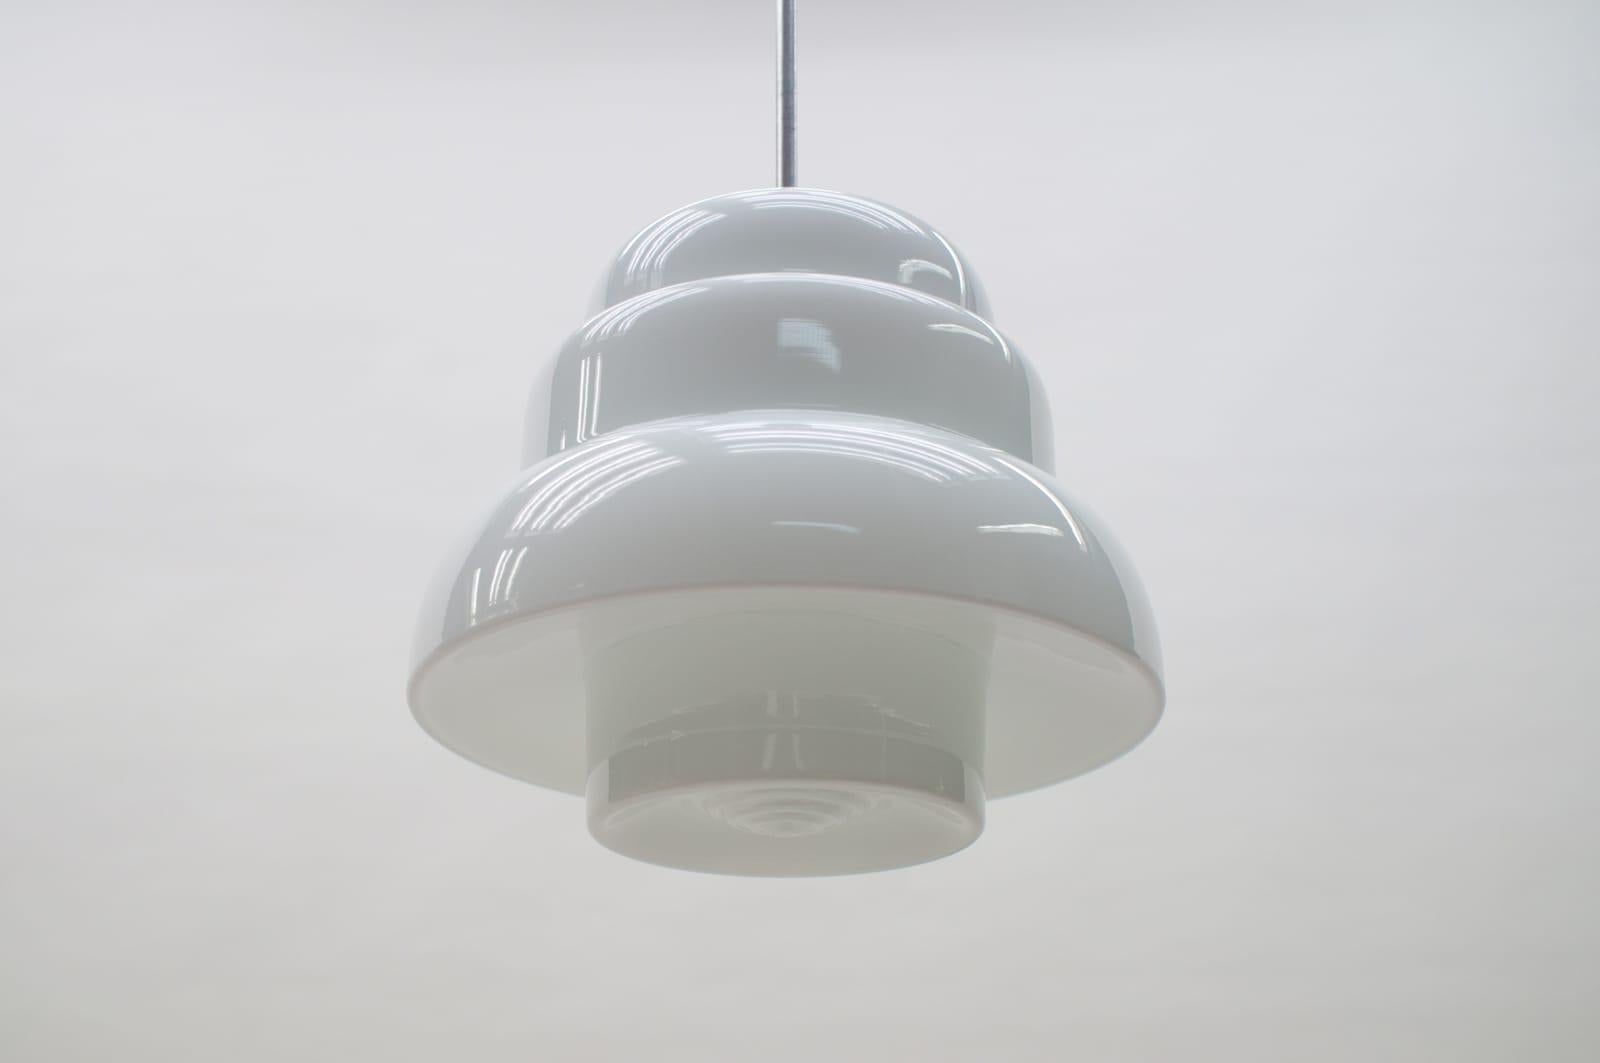 Extremely rare Art Deco stepped milk glass lamp, 1930s-1940s, Germany

A wonderfully stepped ceiling lamp. The typical minimalism of the Bauhaus school. 

The lamp is executed with 1x E27 Edison screw fit bulb. It is wired and in working